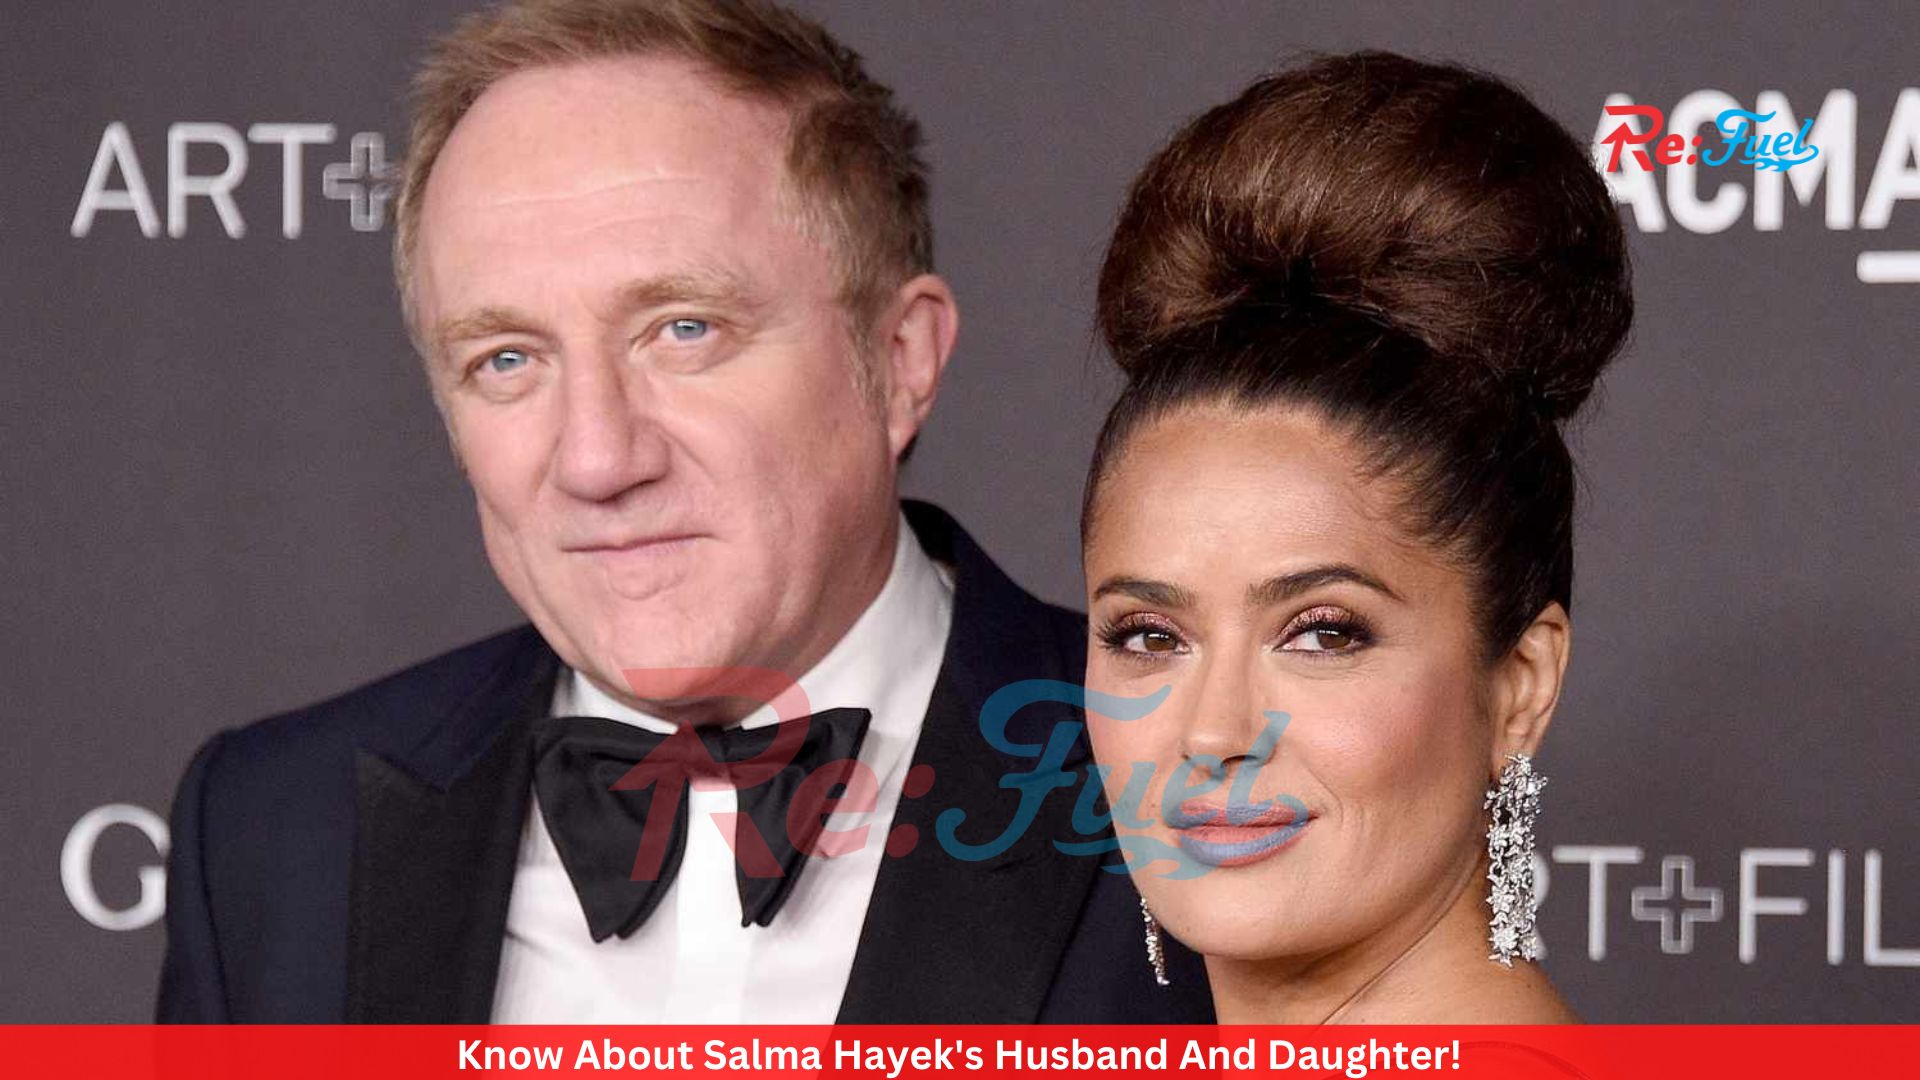 Know About Salma Hayek's Husband And Daughter!